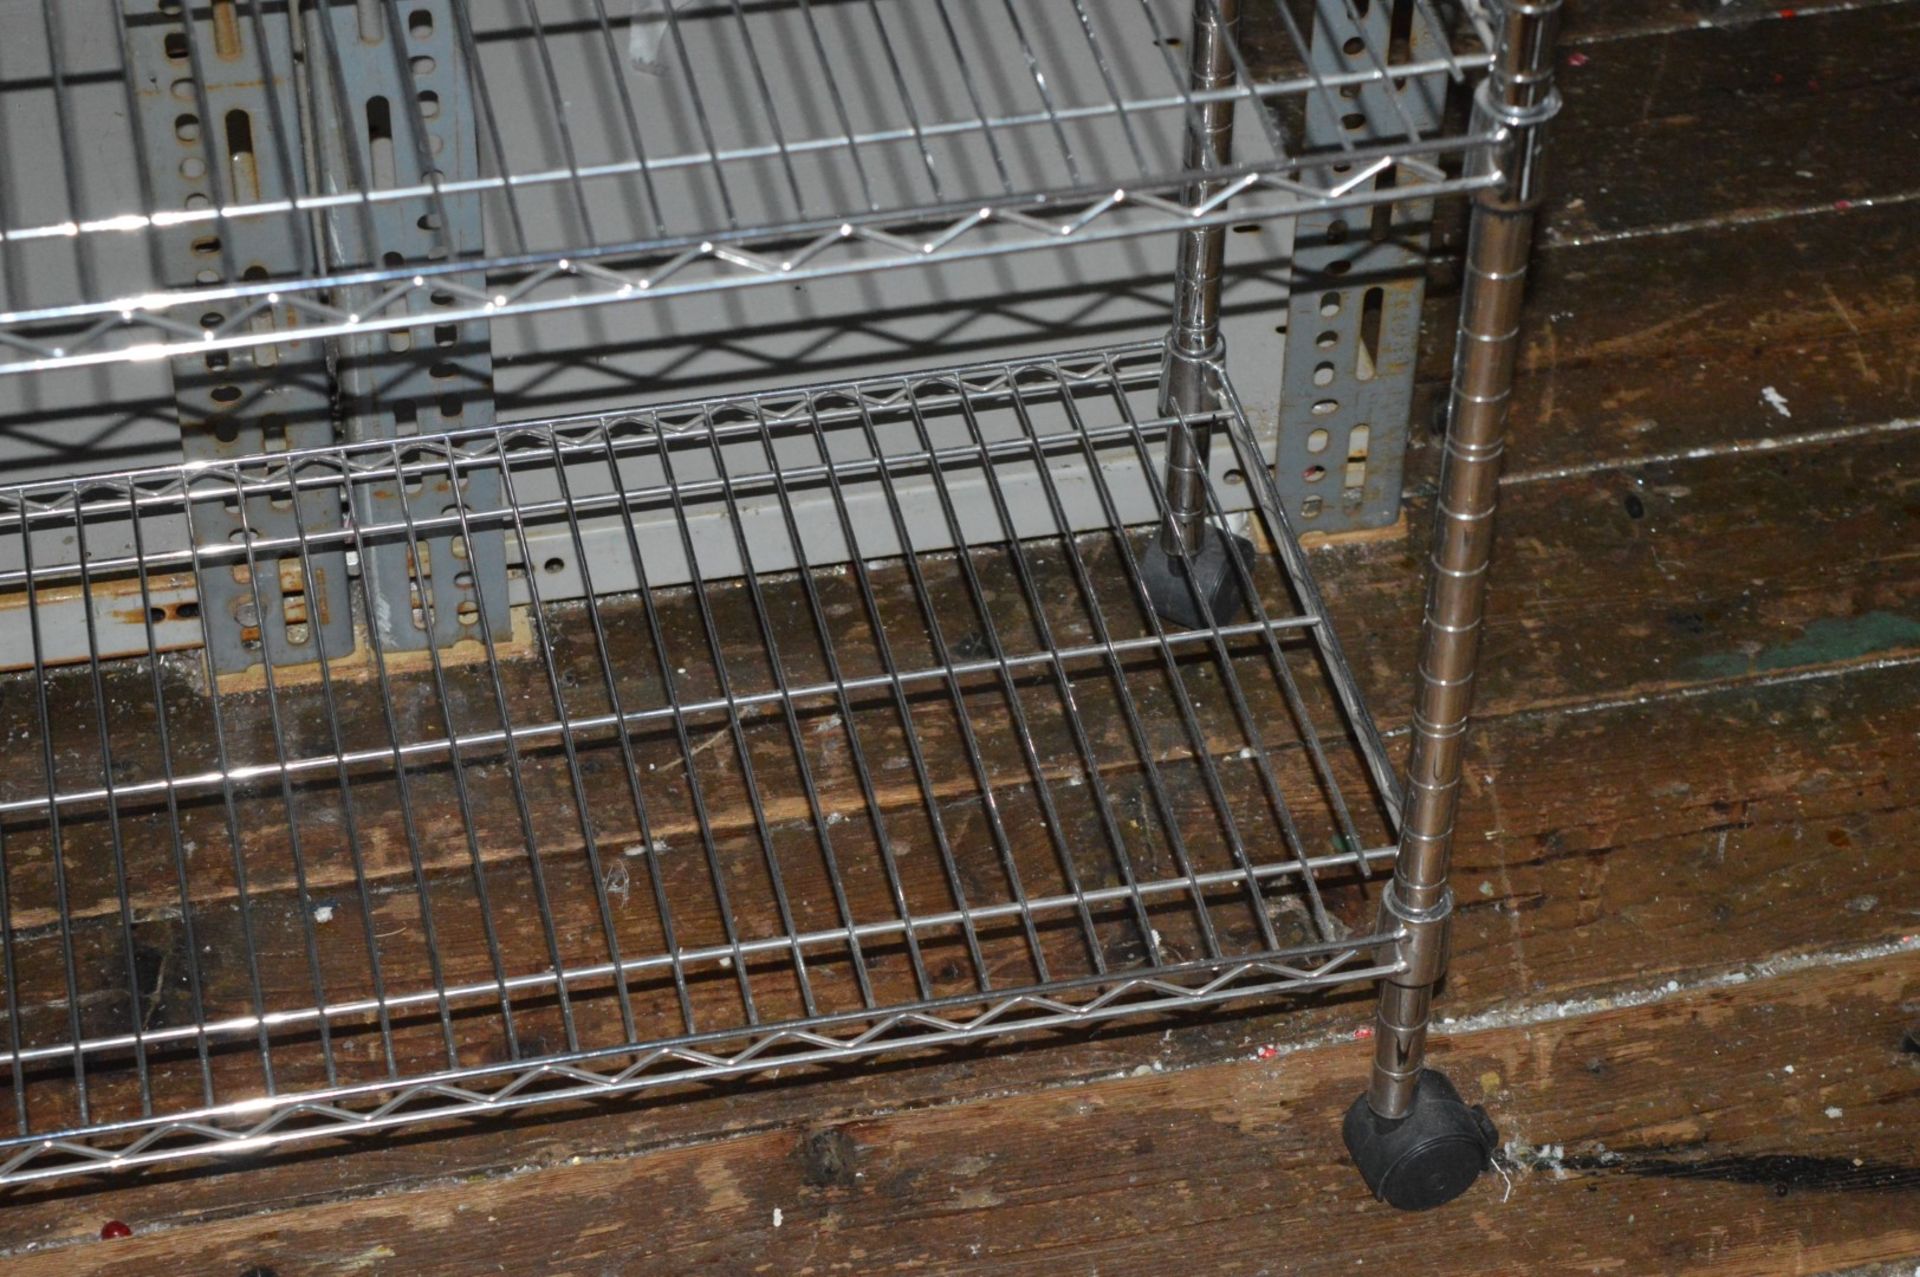 1 x Four Tier Commercial Kitchen Wire Shelving Rack With Castor Wheels - H114 x W90 x D35 cms - Used - Image 2 of 4